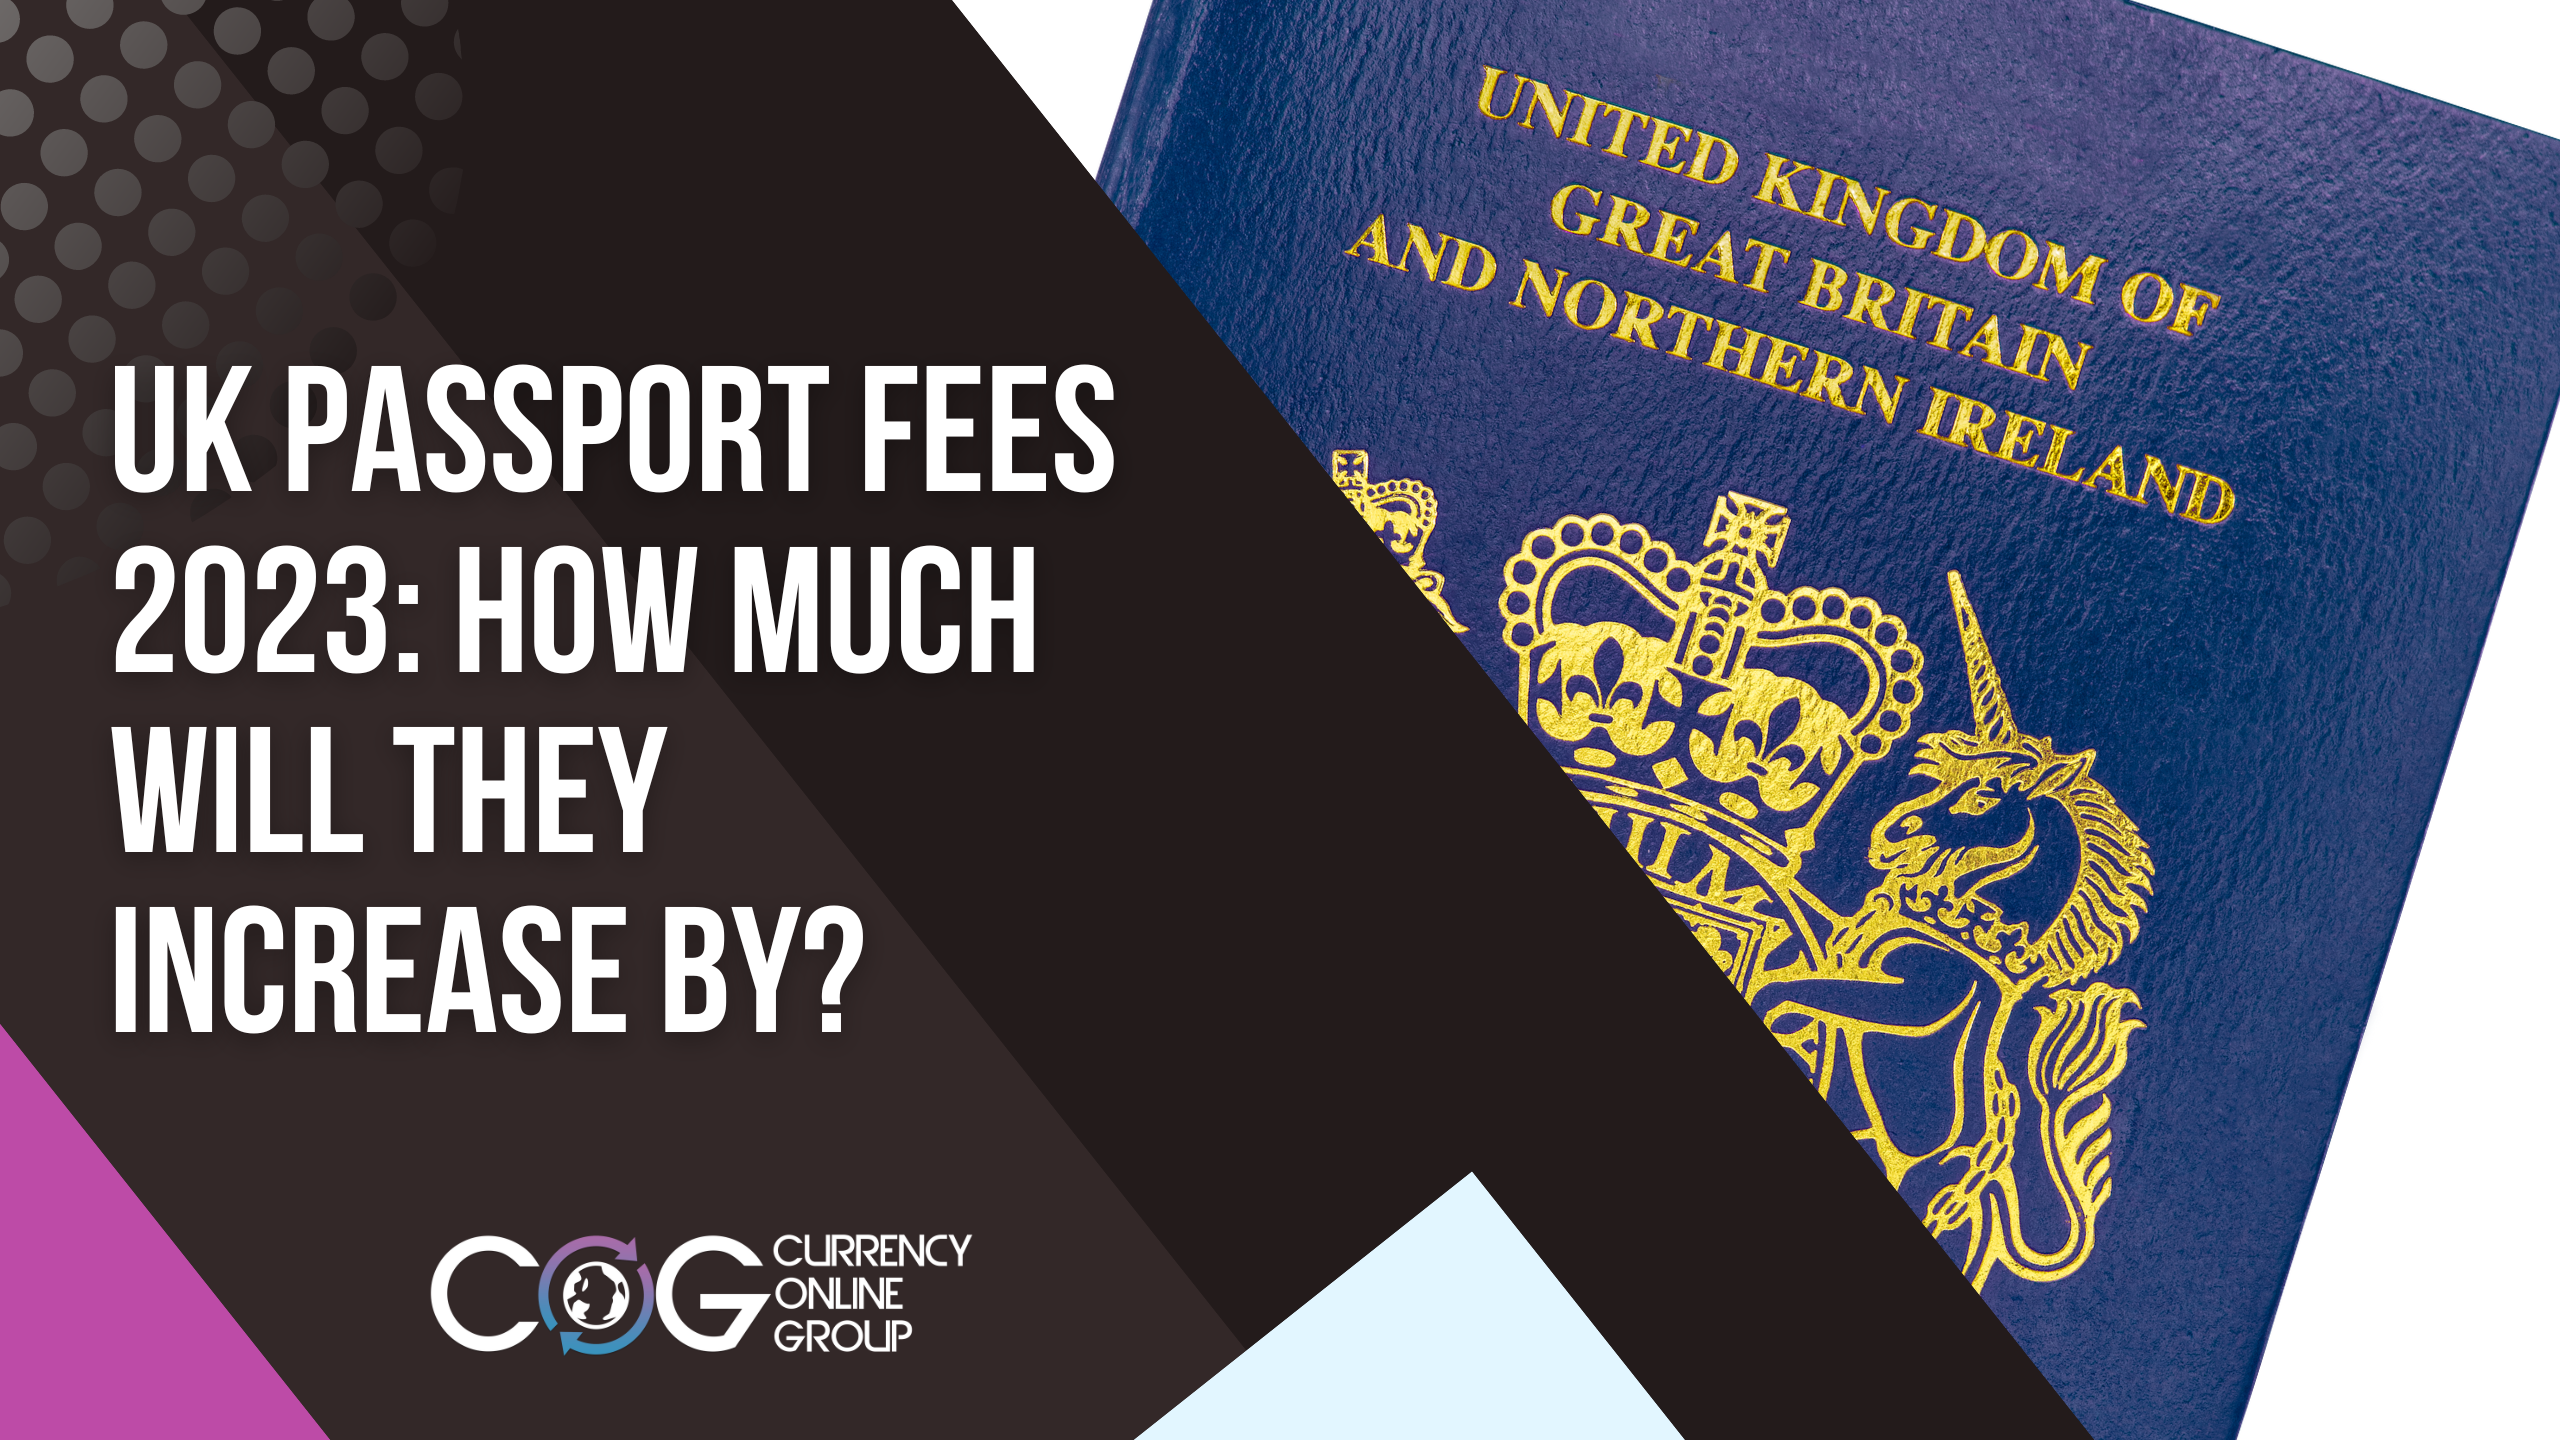 UK Passport Fees 2023: How much will they increase by?